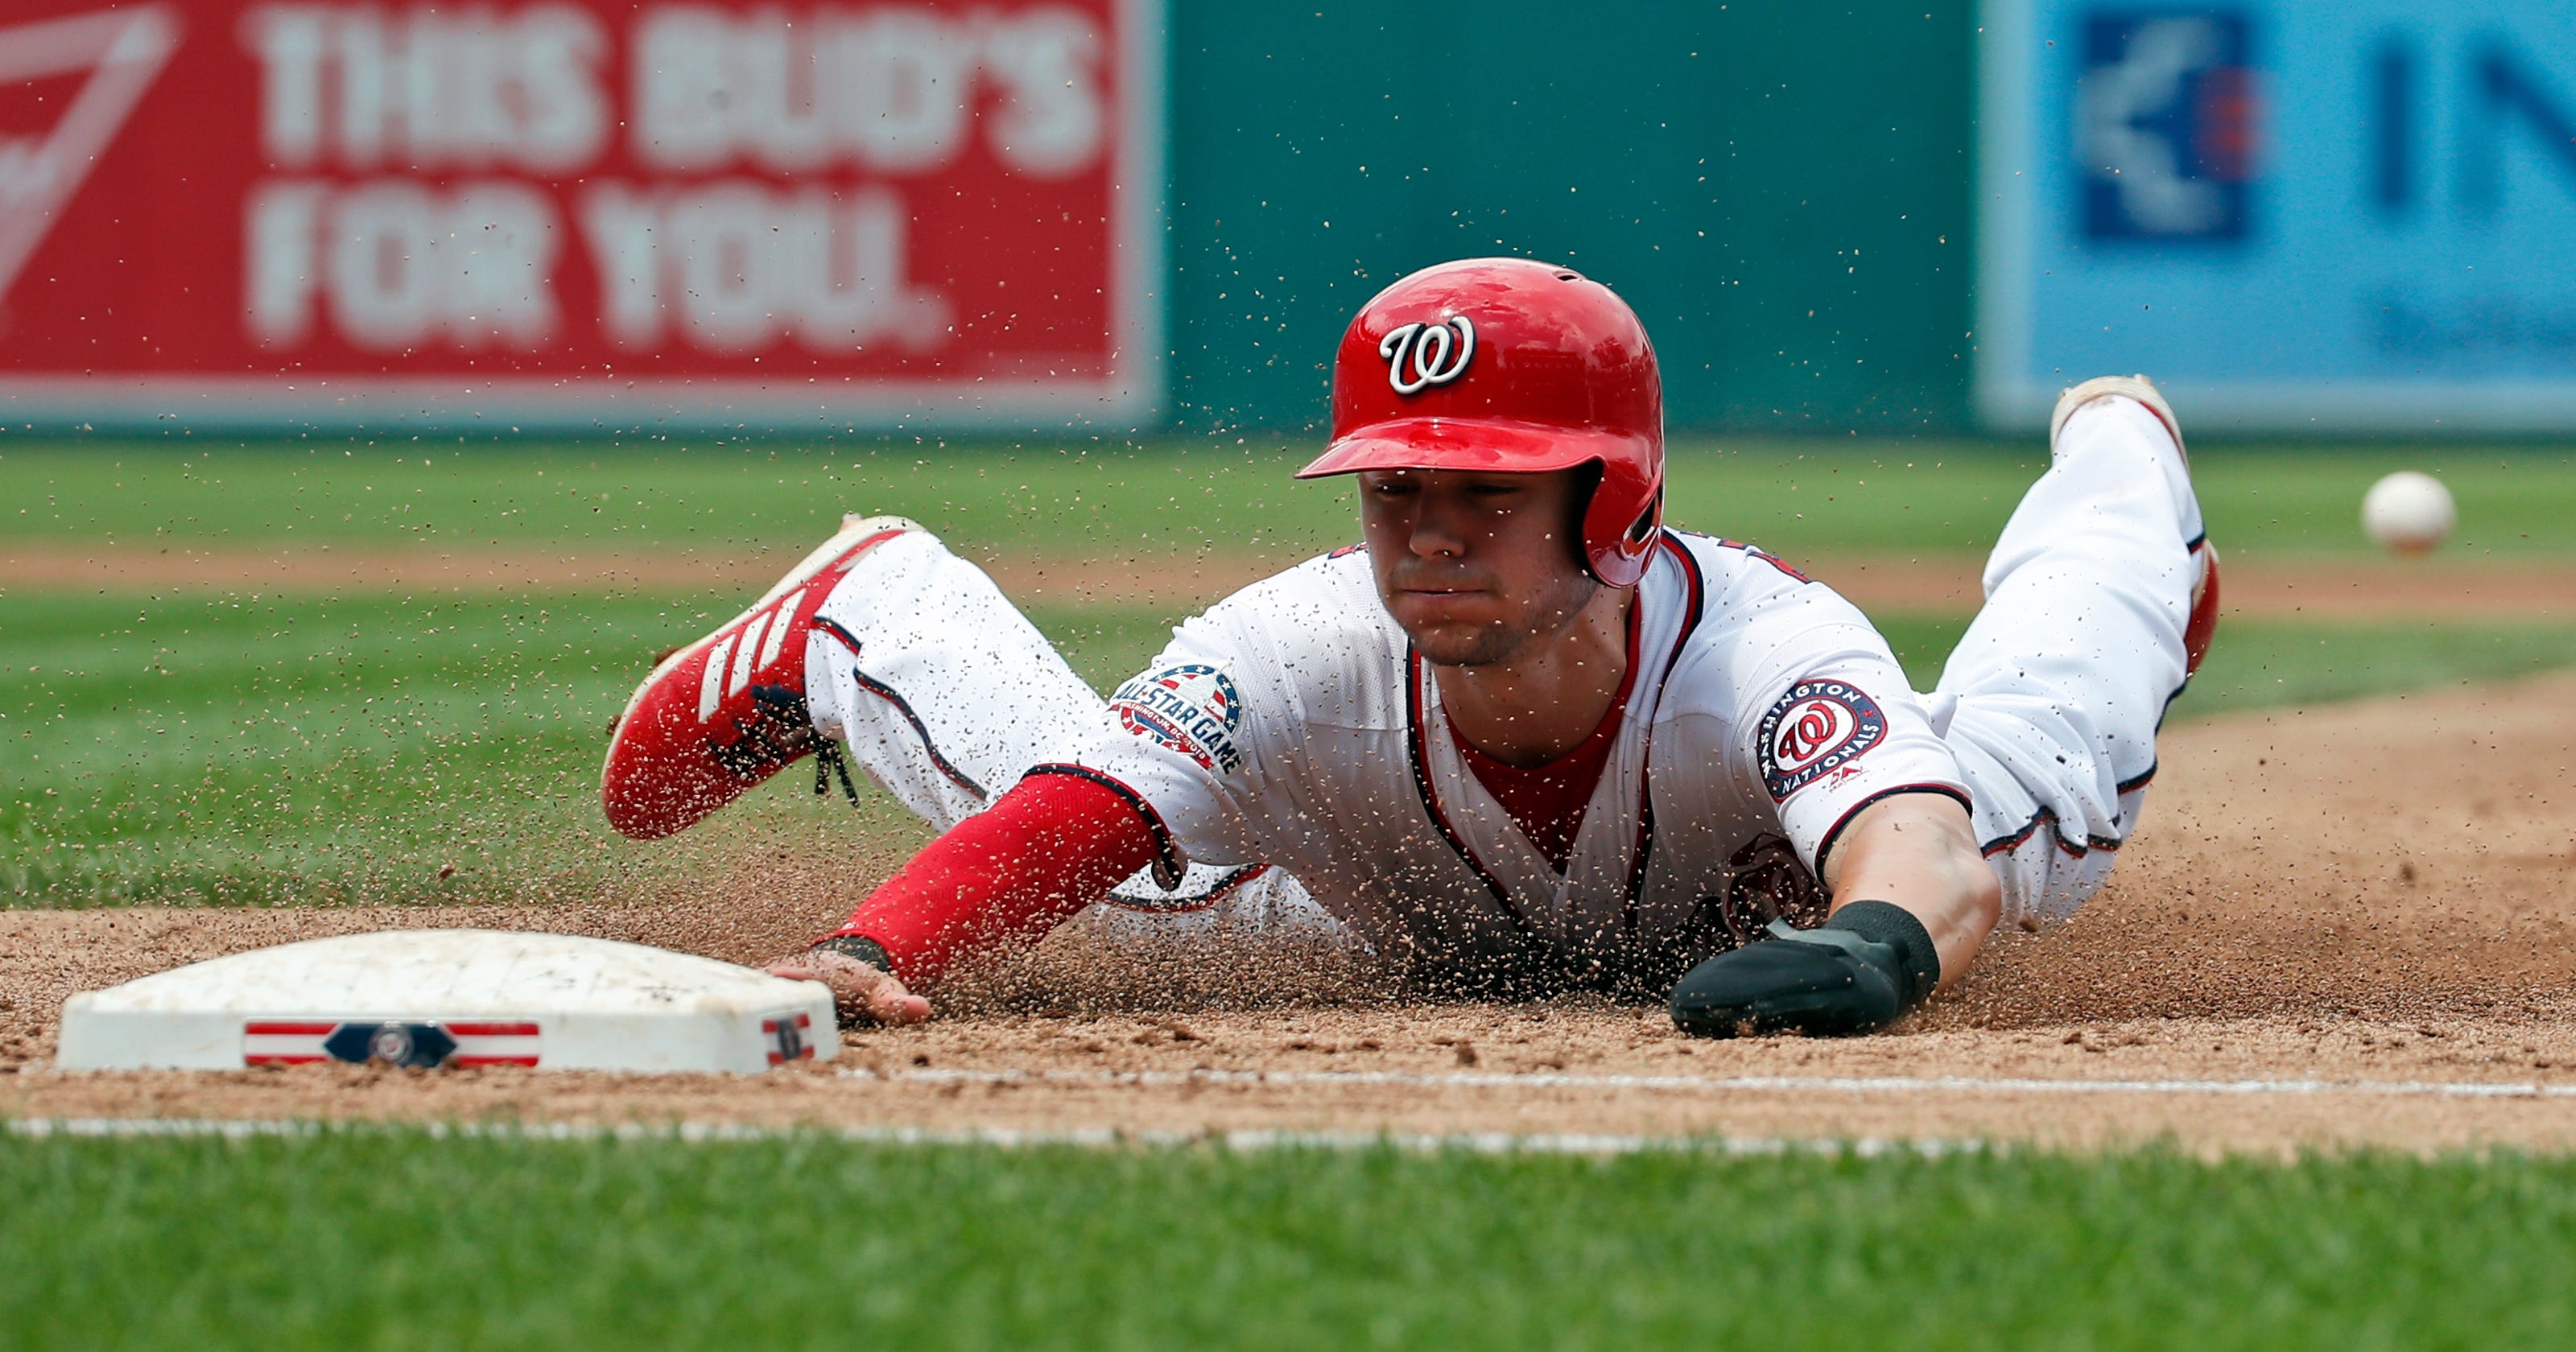 Harper, Zimmerman HRs send Nats past Braves 8-3 in 1st game - What Network Is Carrying The Braves Game Today